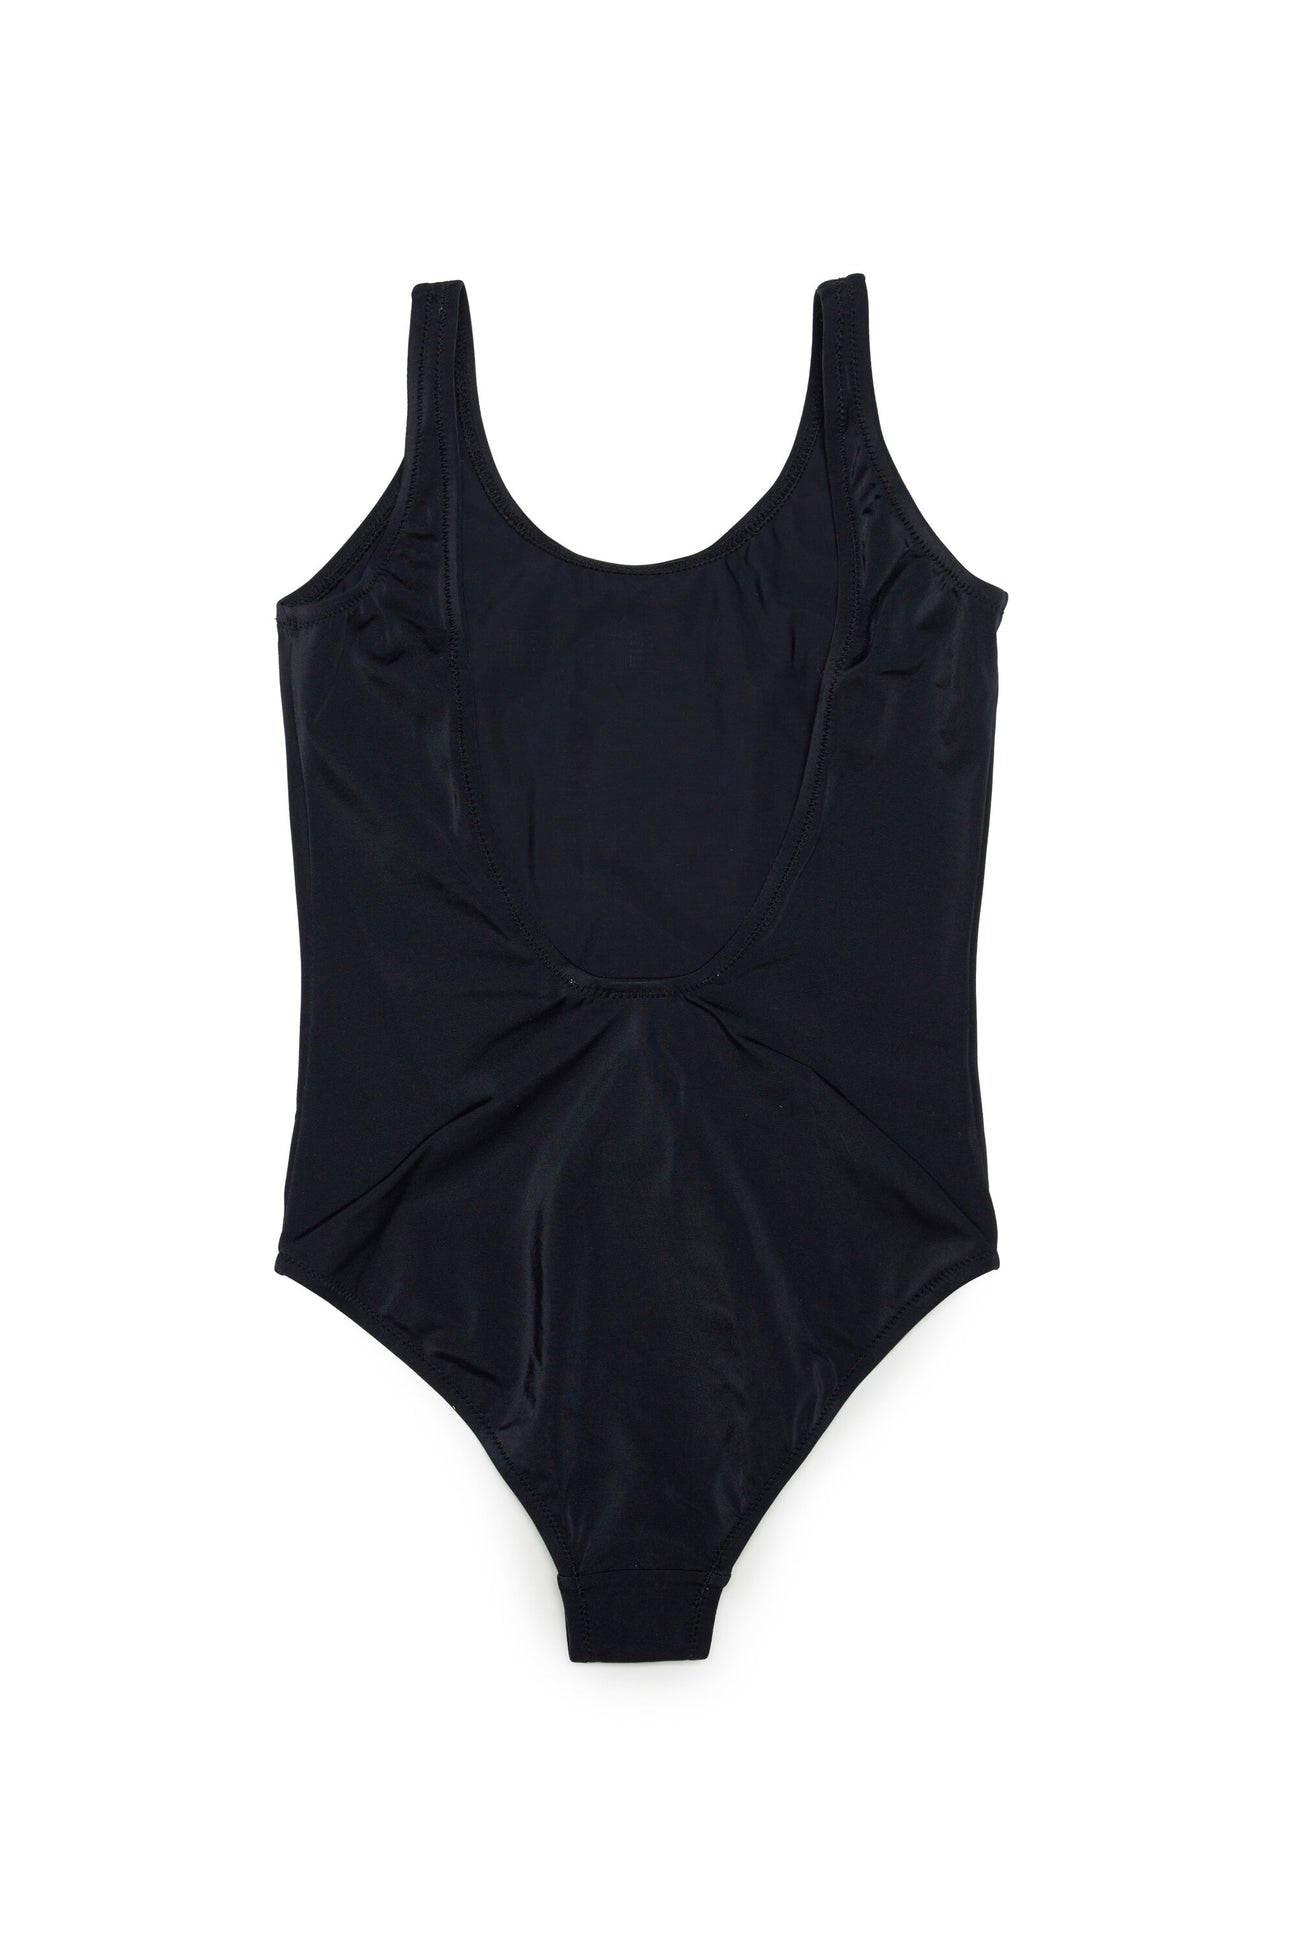 Black one-piece swimming costume in lycra with logo Black one-piece swimming costume in lycra with logo